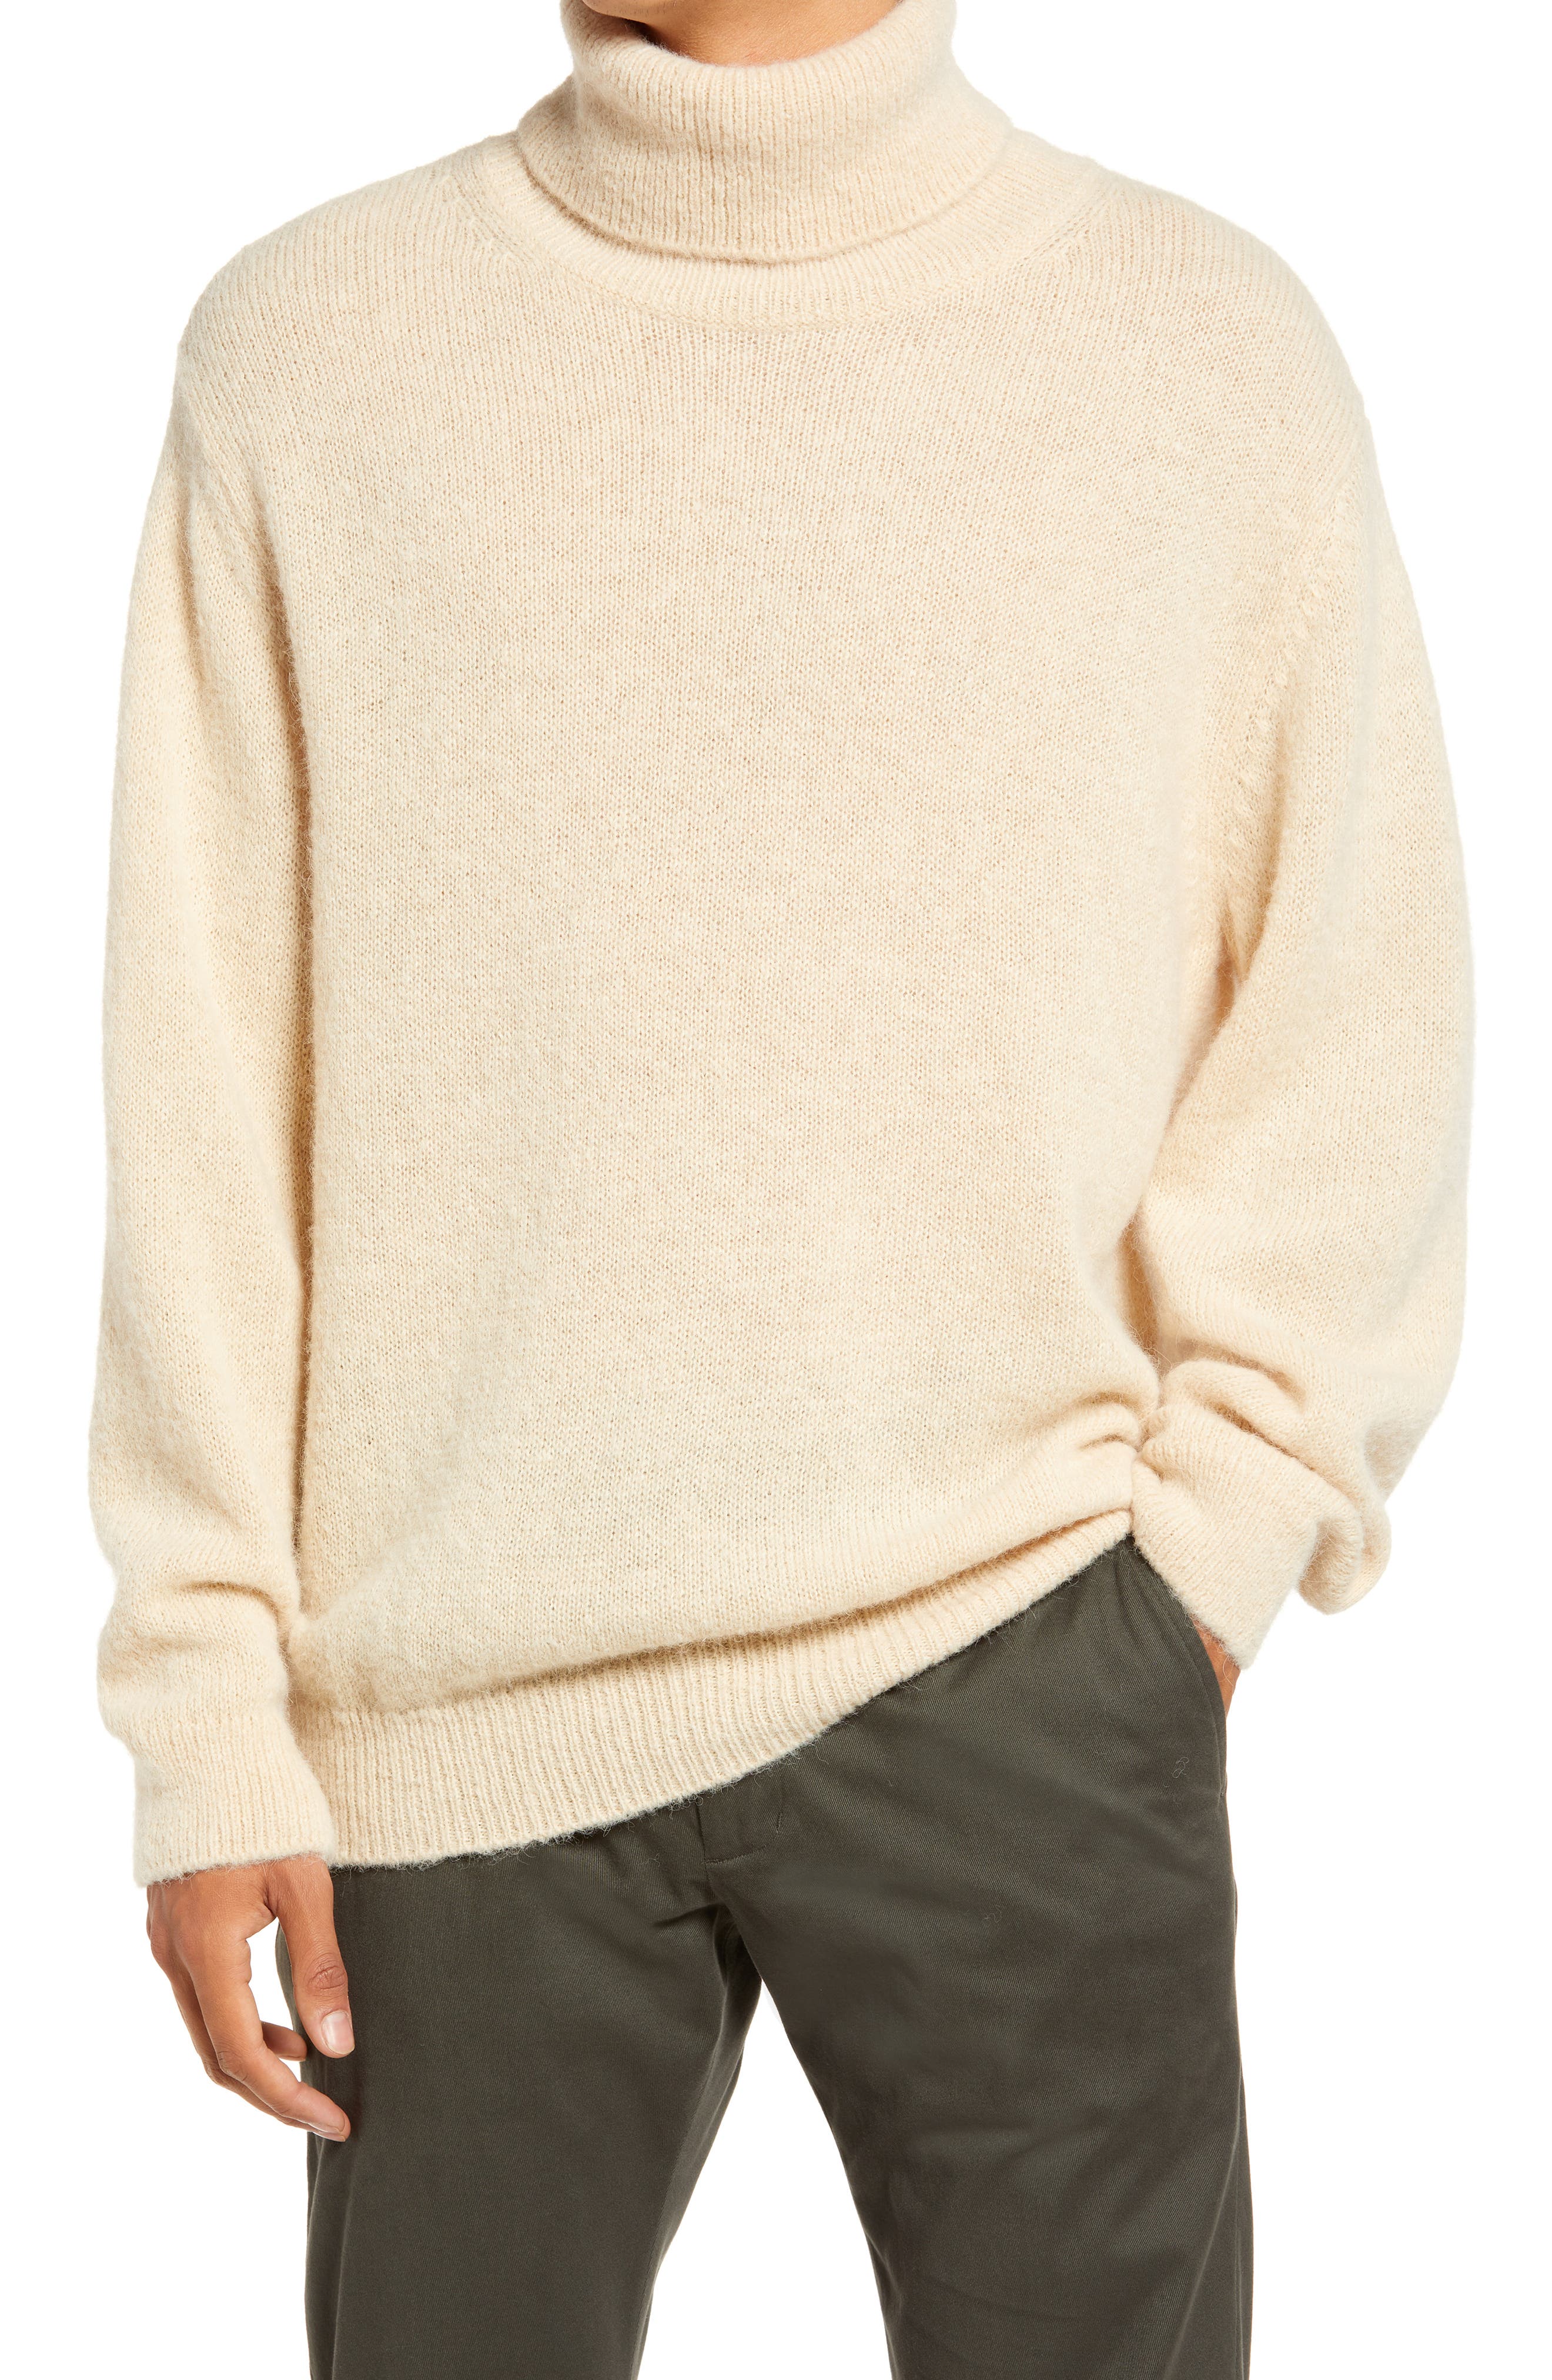 Andopa Mens Turtleneck Solid Color Classic Rib Slim Knitwear Sweaters 